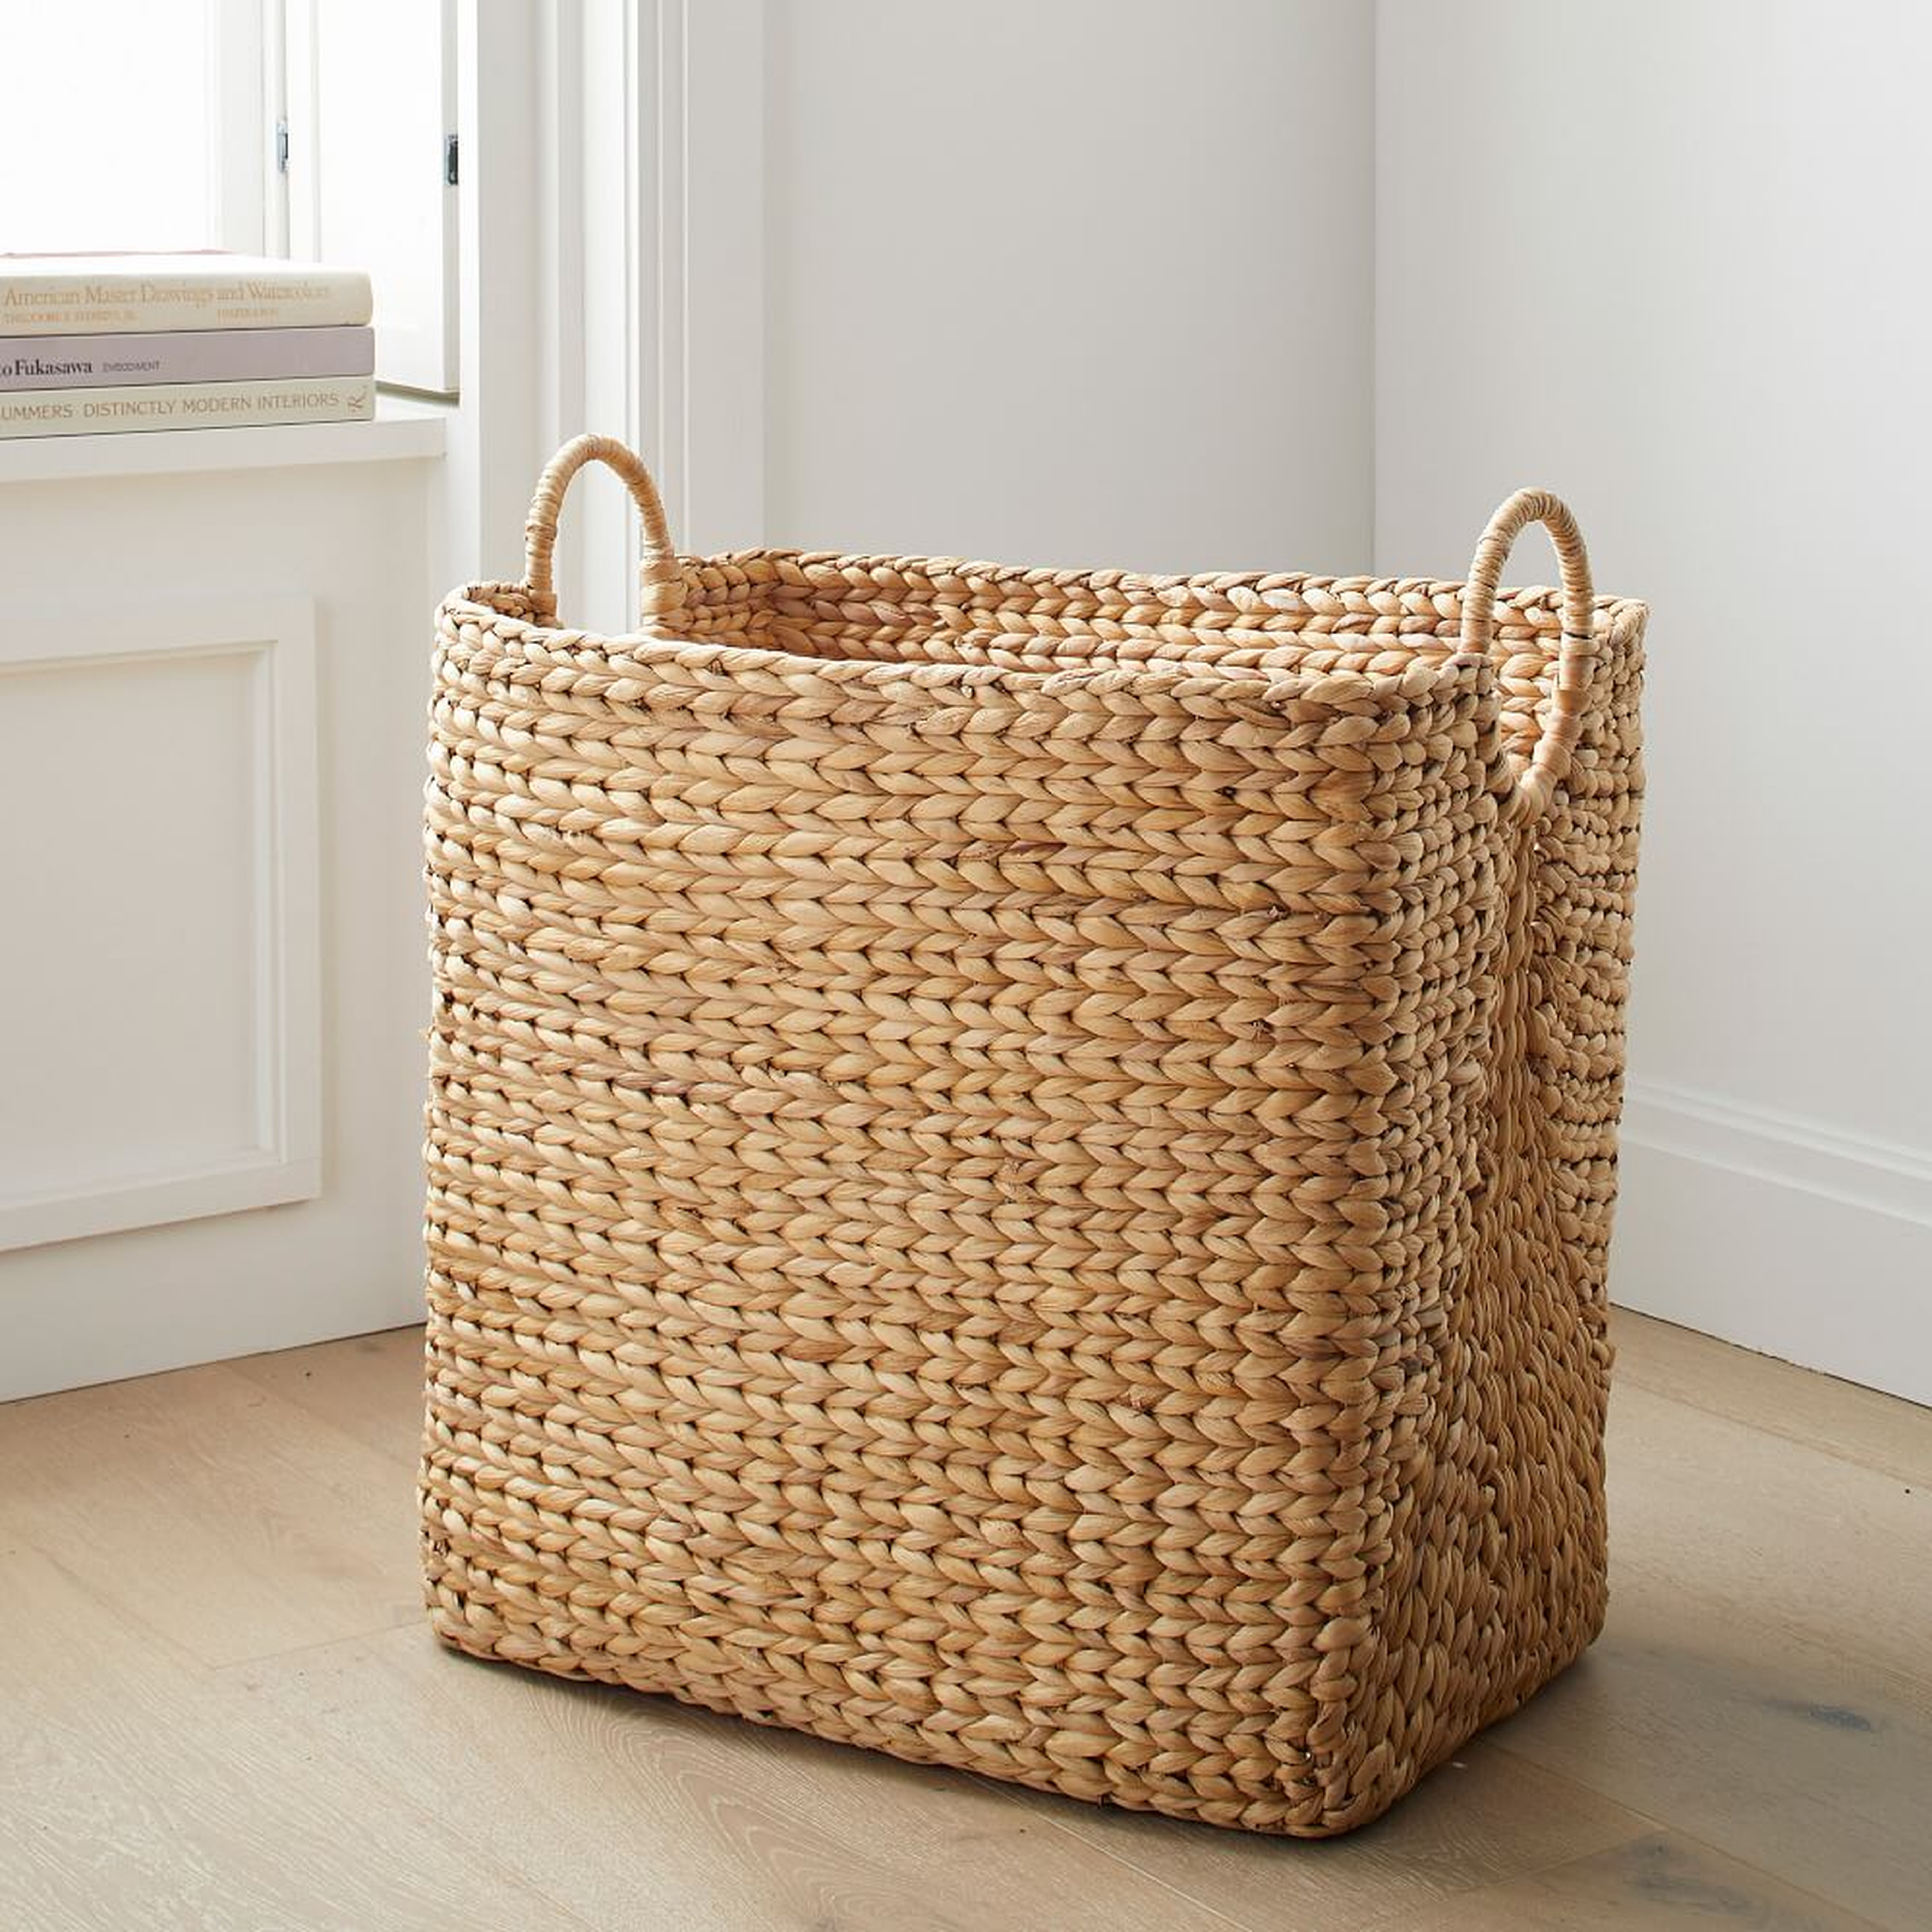 Curved Seagrass Basket, Utility Handle Baskets, Large, 15.4"W x 23.6"D x 24.8"H - West Elm